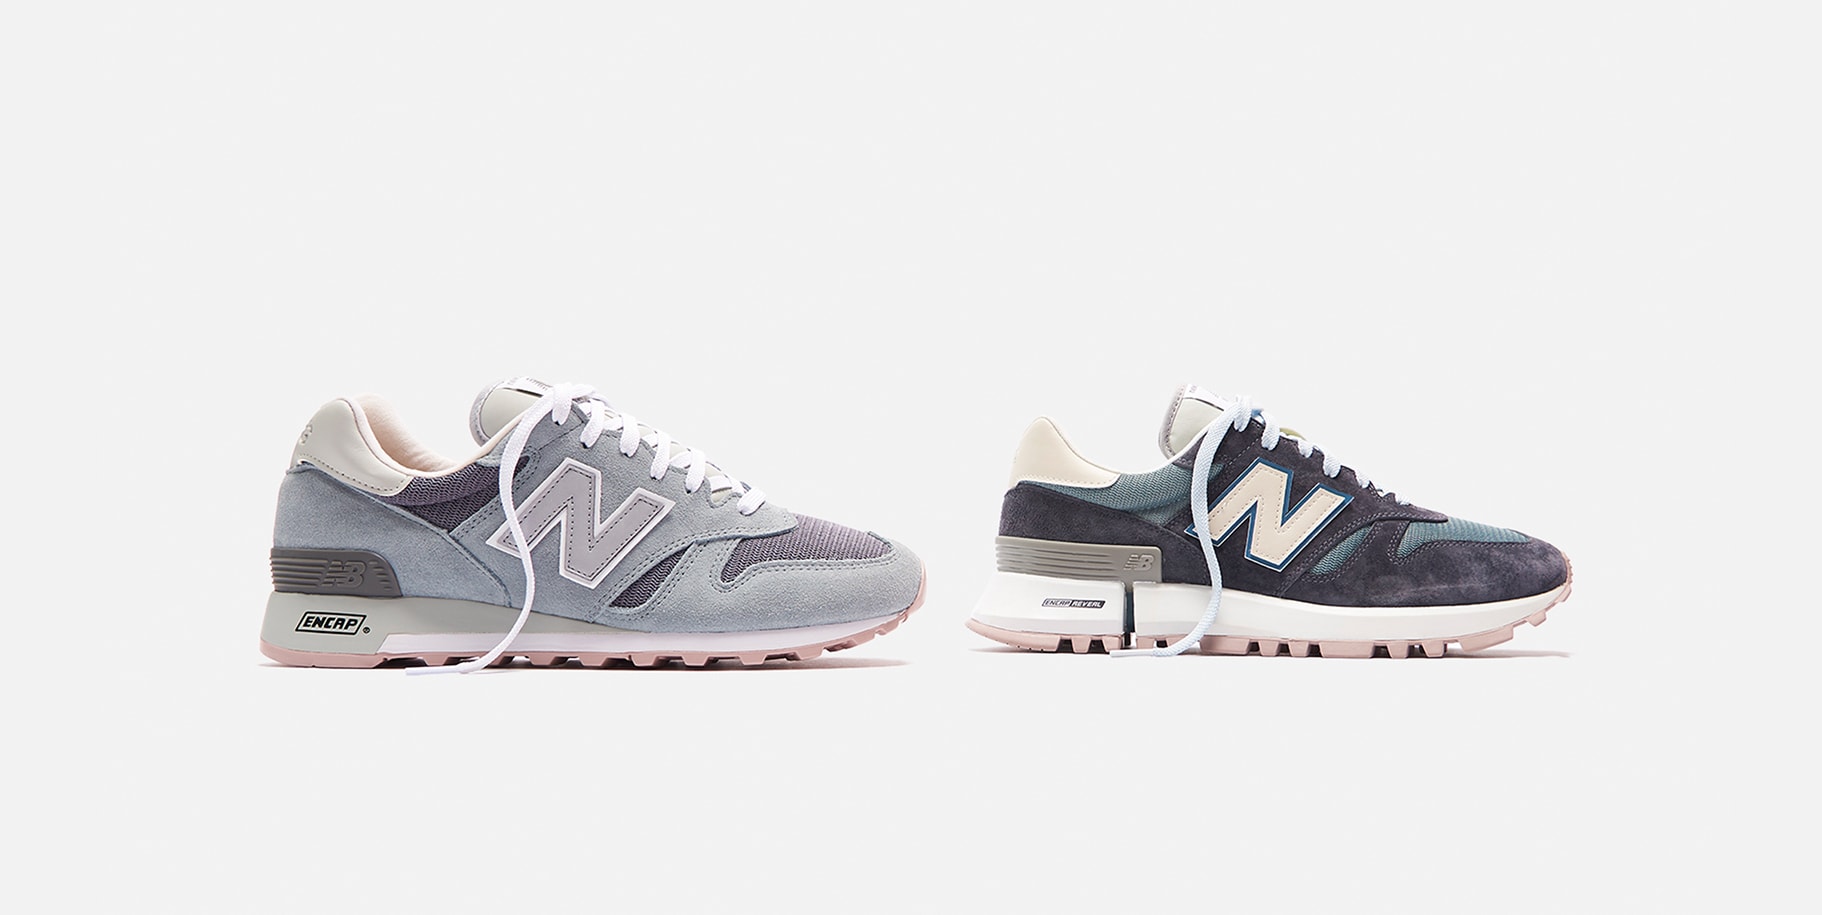 Ronnie Fieg x New Balance 1300CL Capsule Lateral